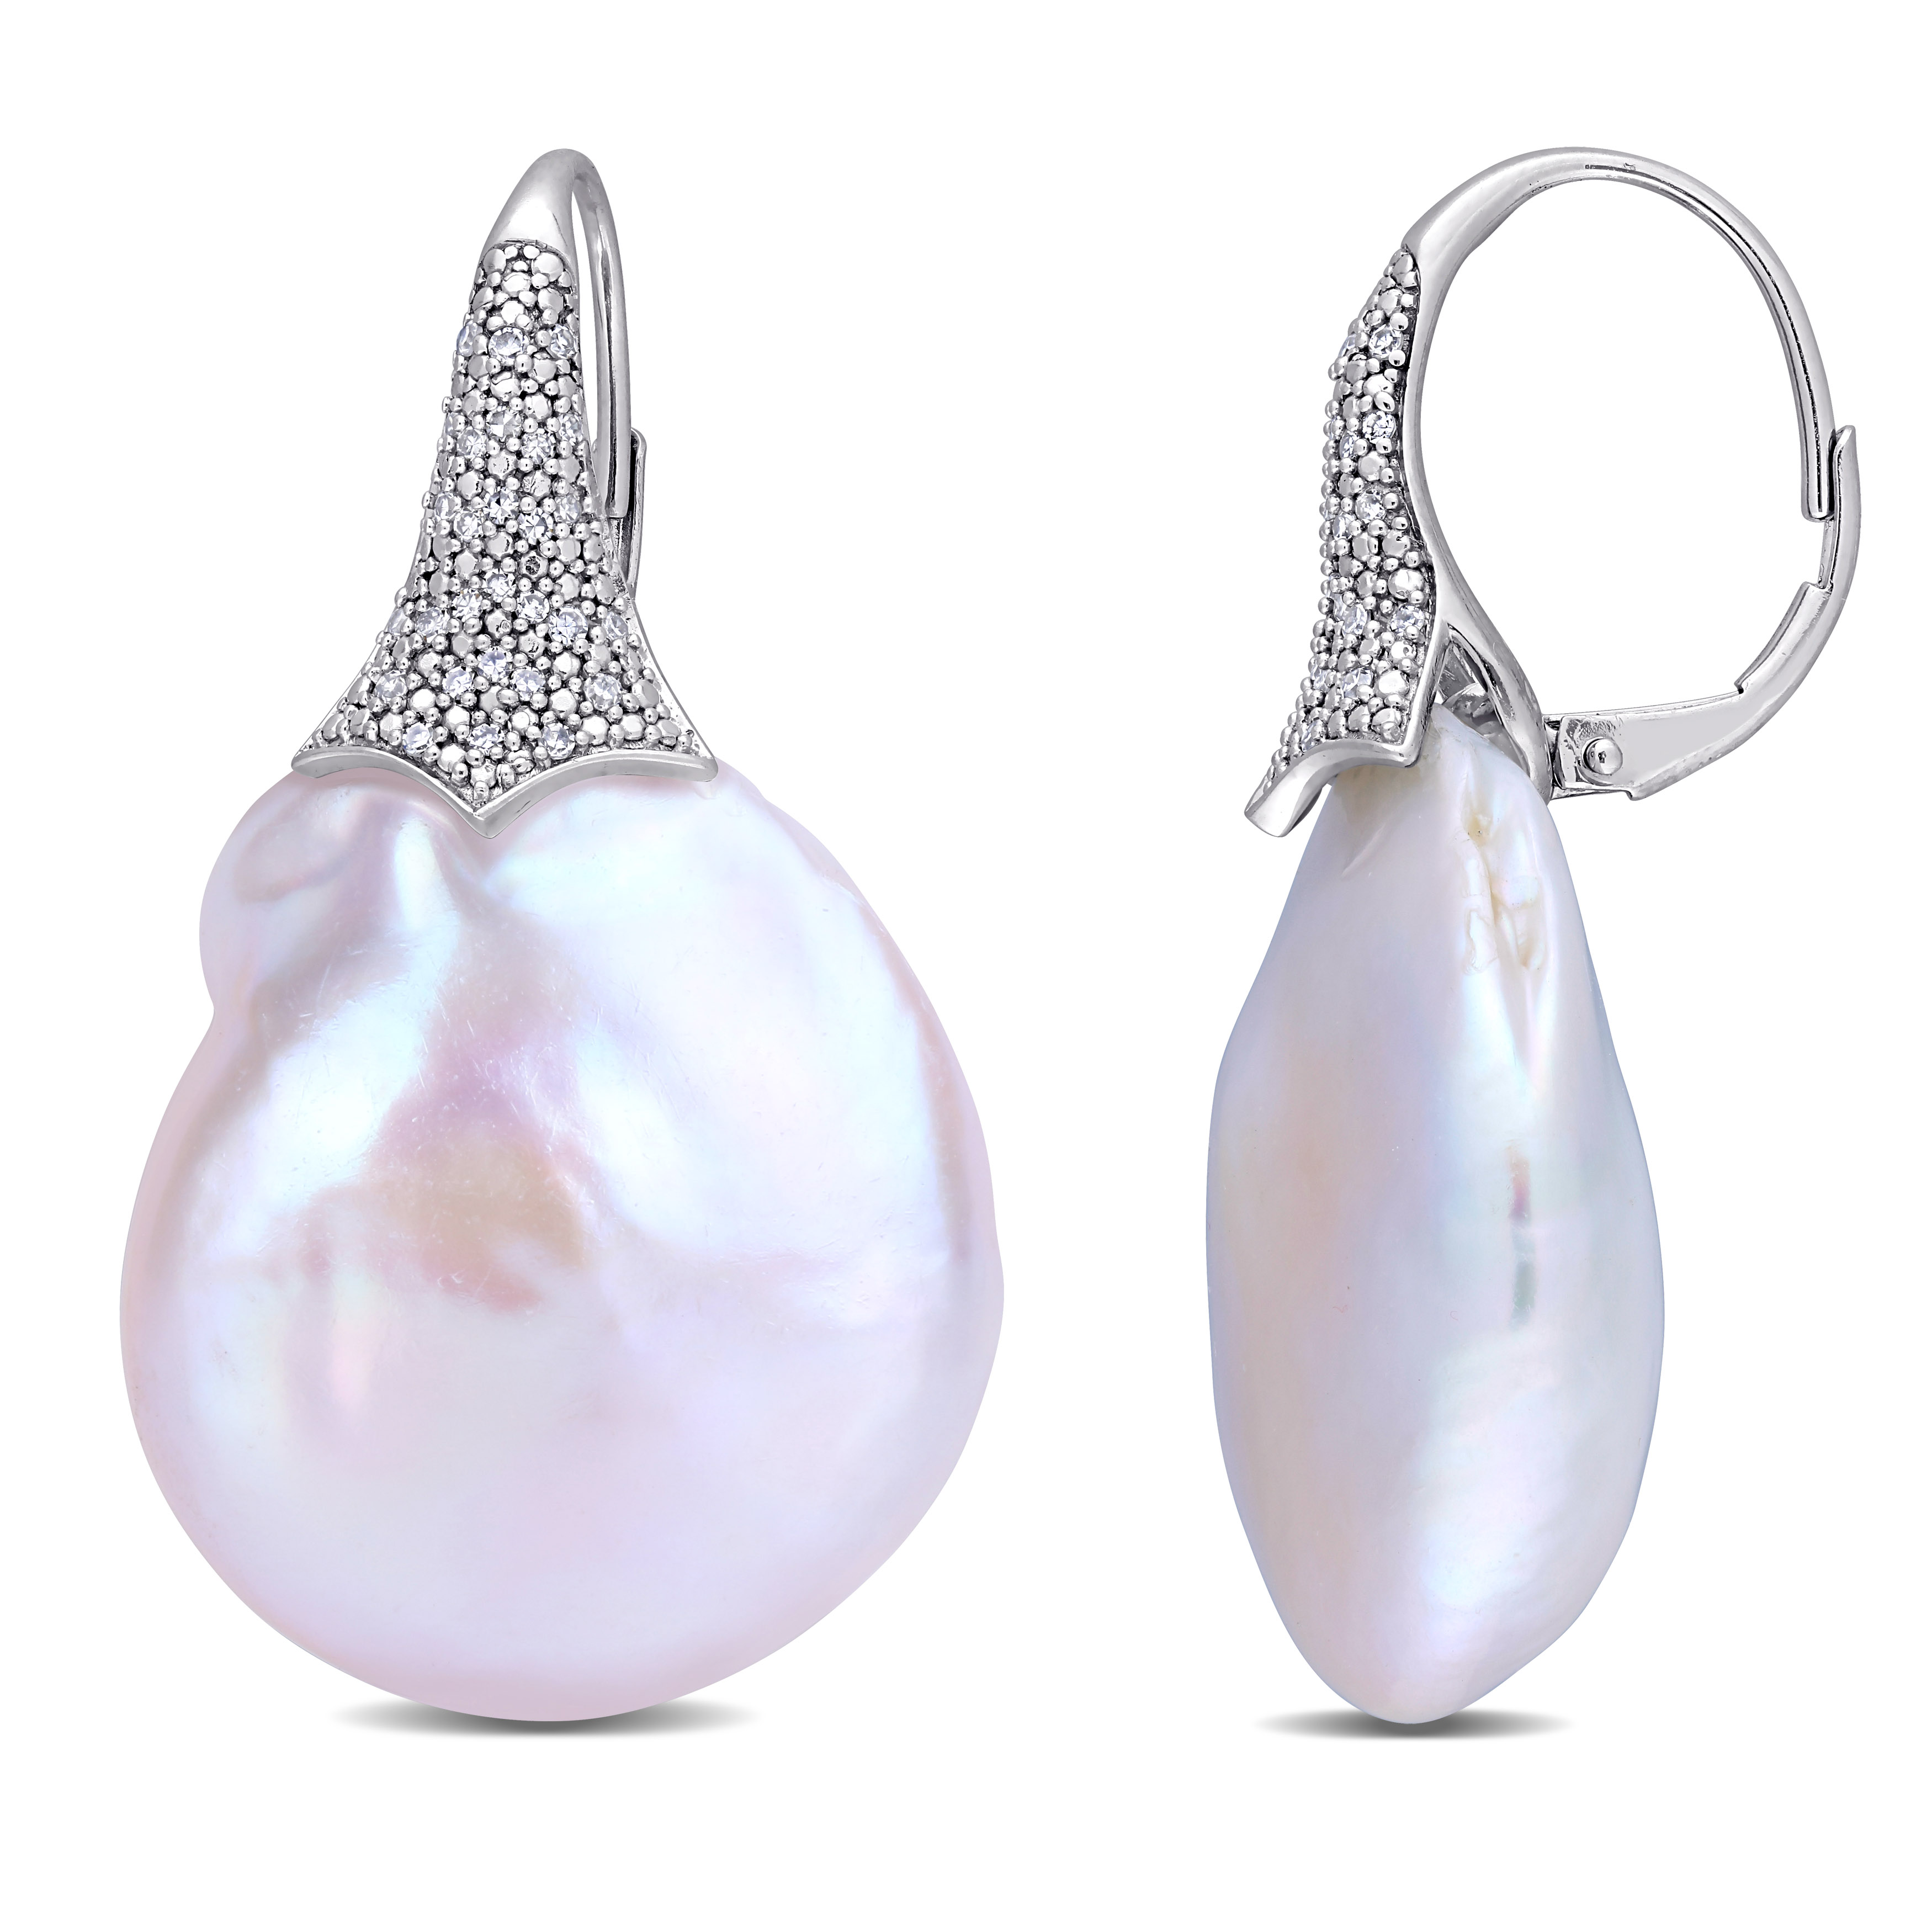 20 - 20.5 MM Cultured Freshwater White Coin Pearl and 1/4 CT TW Diamond Leverback Drop Earrings in 14k White Gold